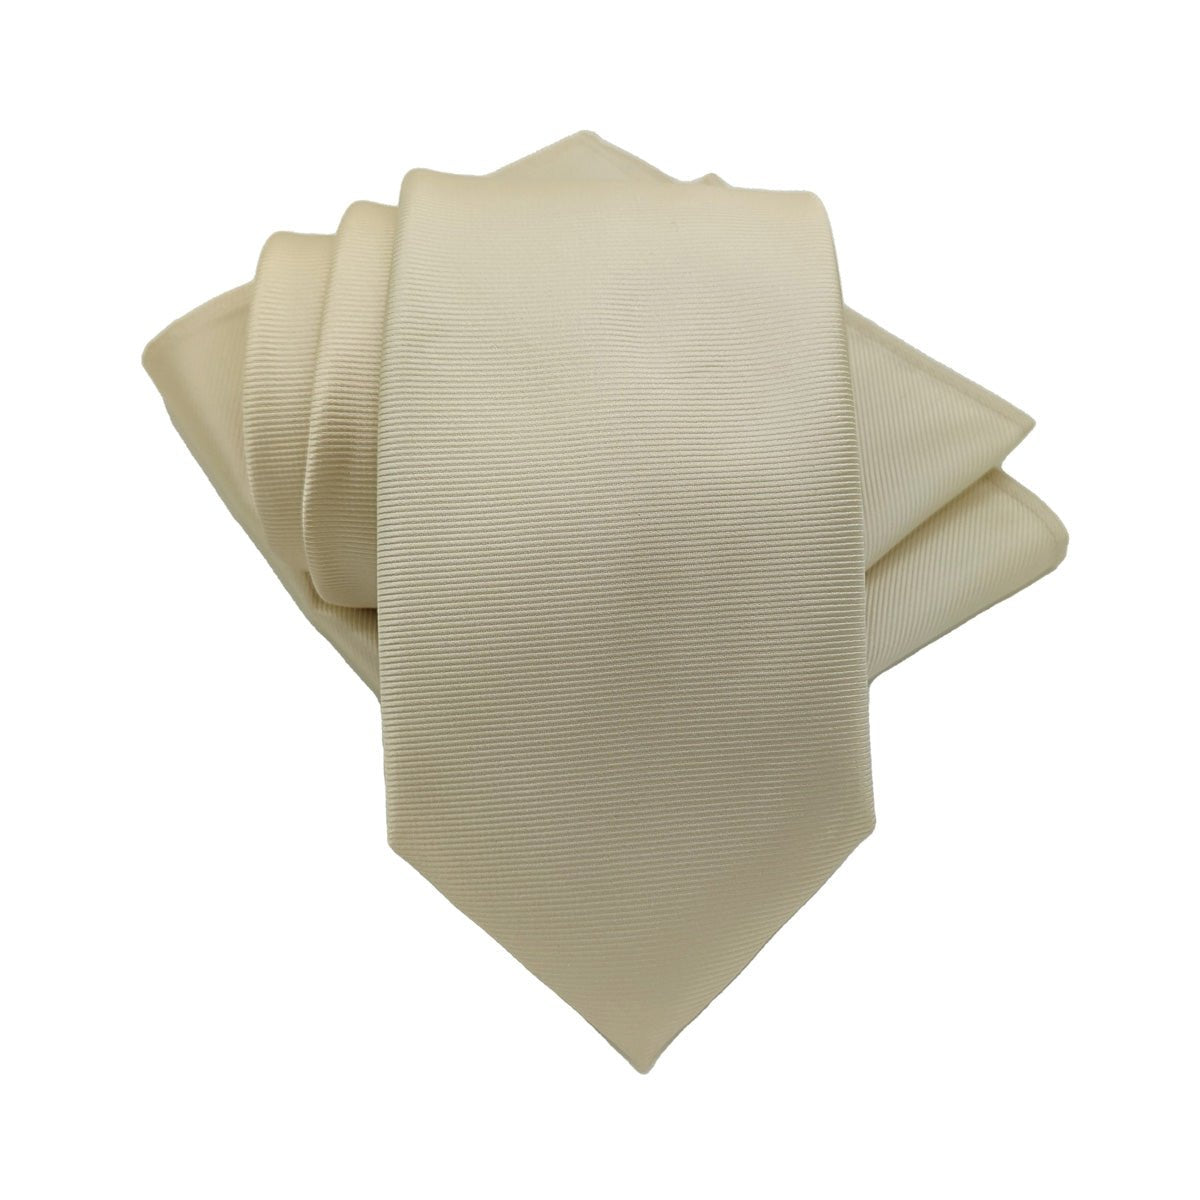 Ivory Twill Pocket Square - Wedding Pocket Square - - Swagger & Swoon